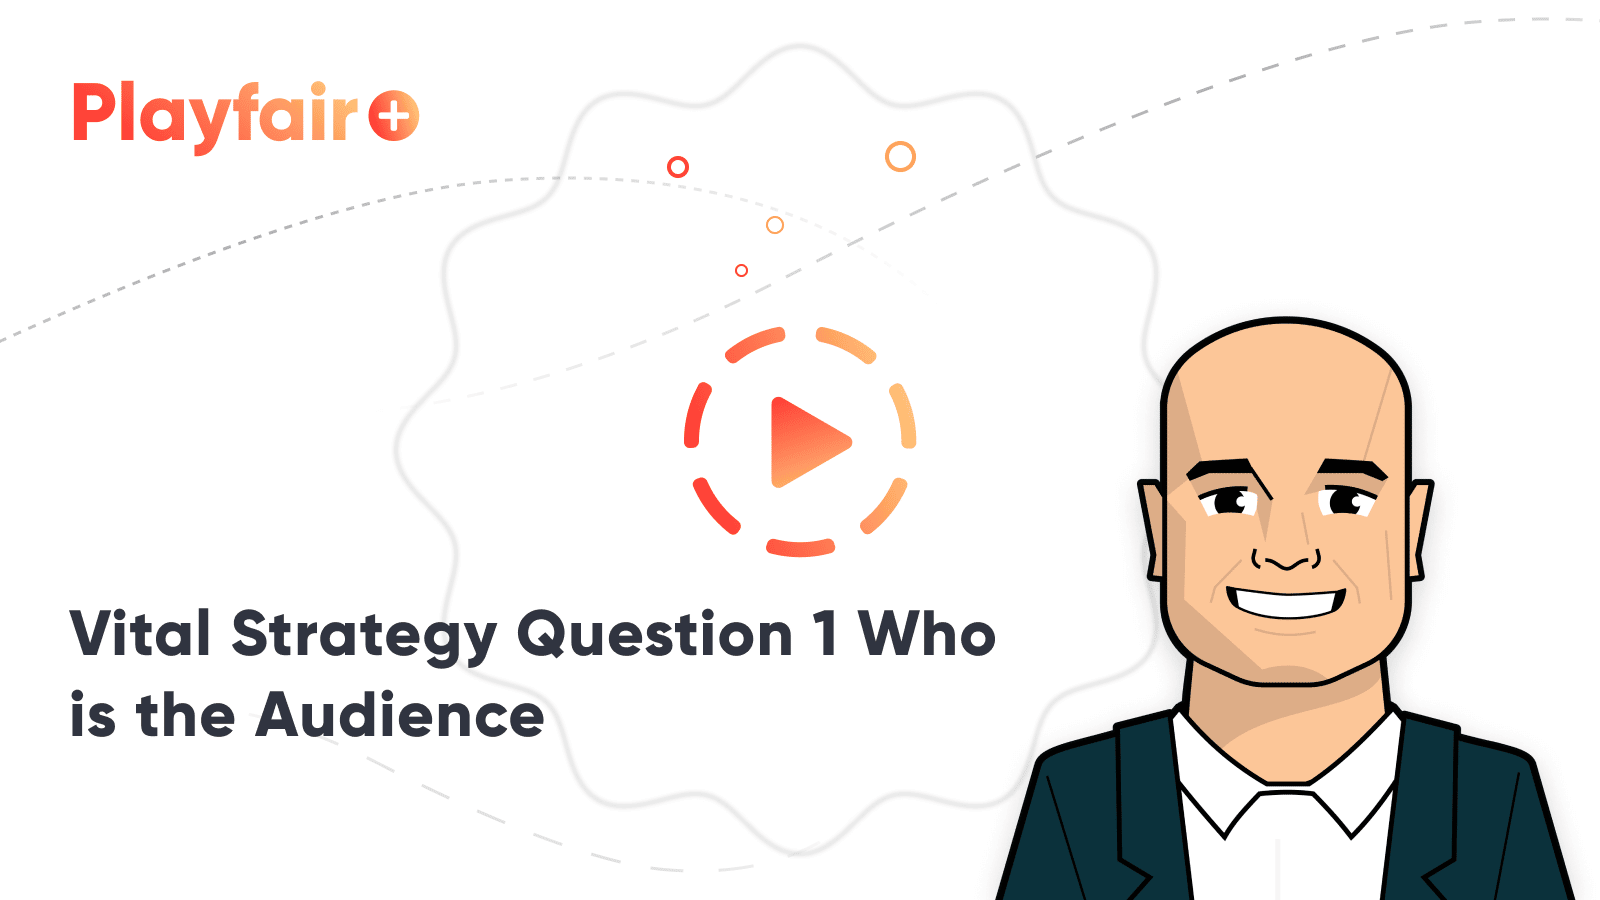 Vital Strategy Question 1 Who is the Audience